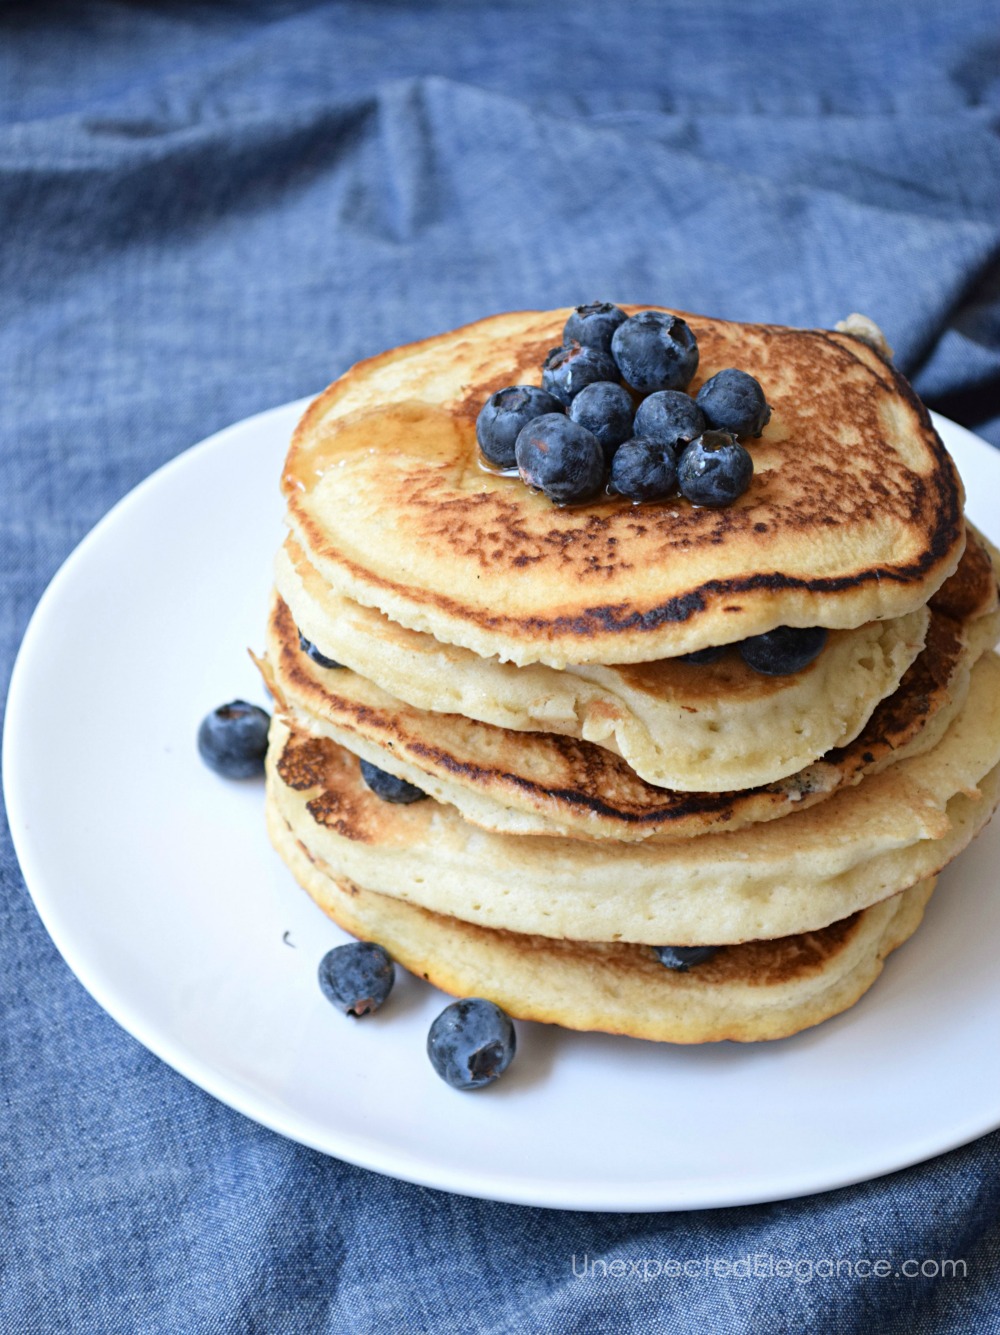 Gluten free and vegan pancakes! These are so delicious!